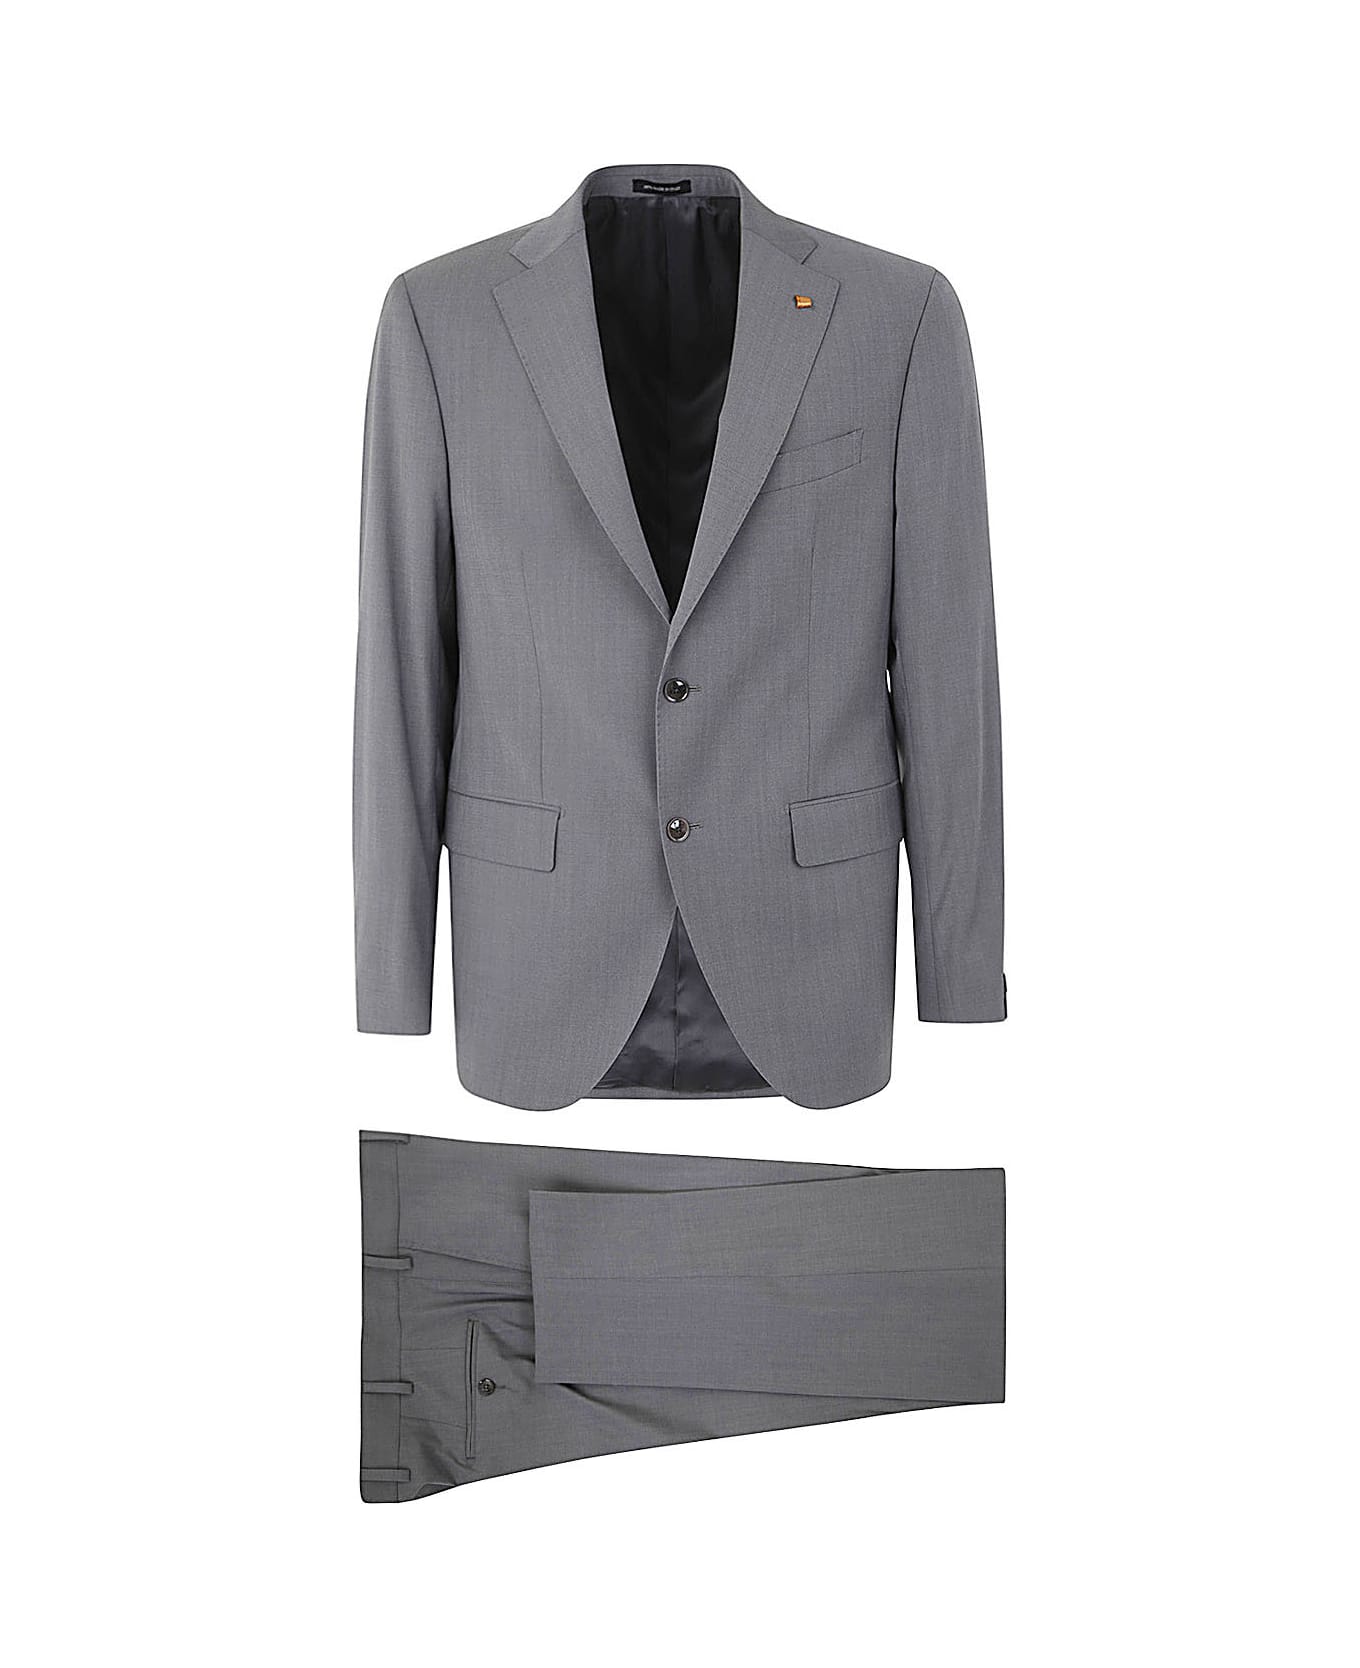 Sartoria Latorre Suit With Two Buttons - Lead スーツ